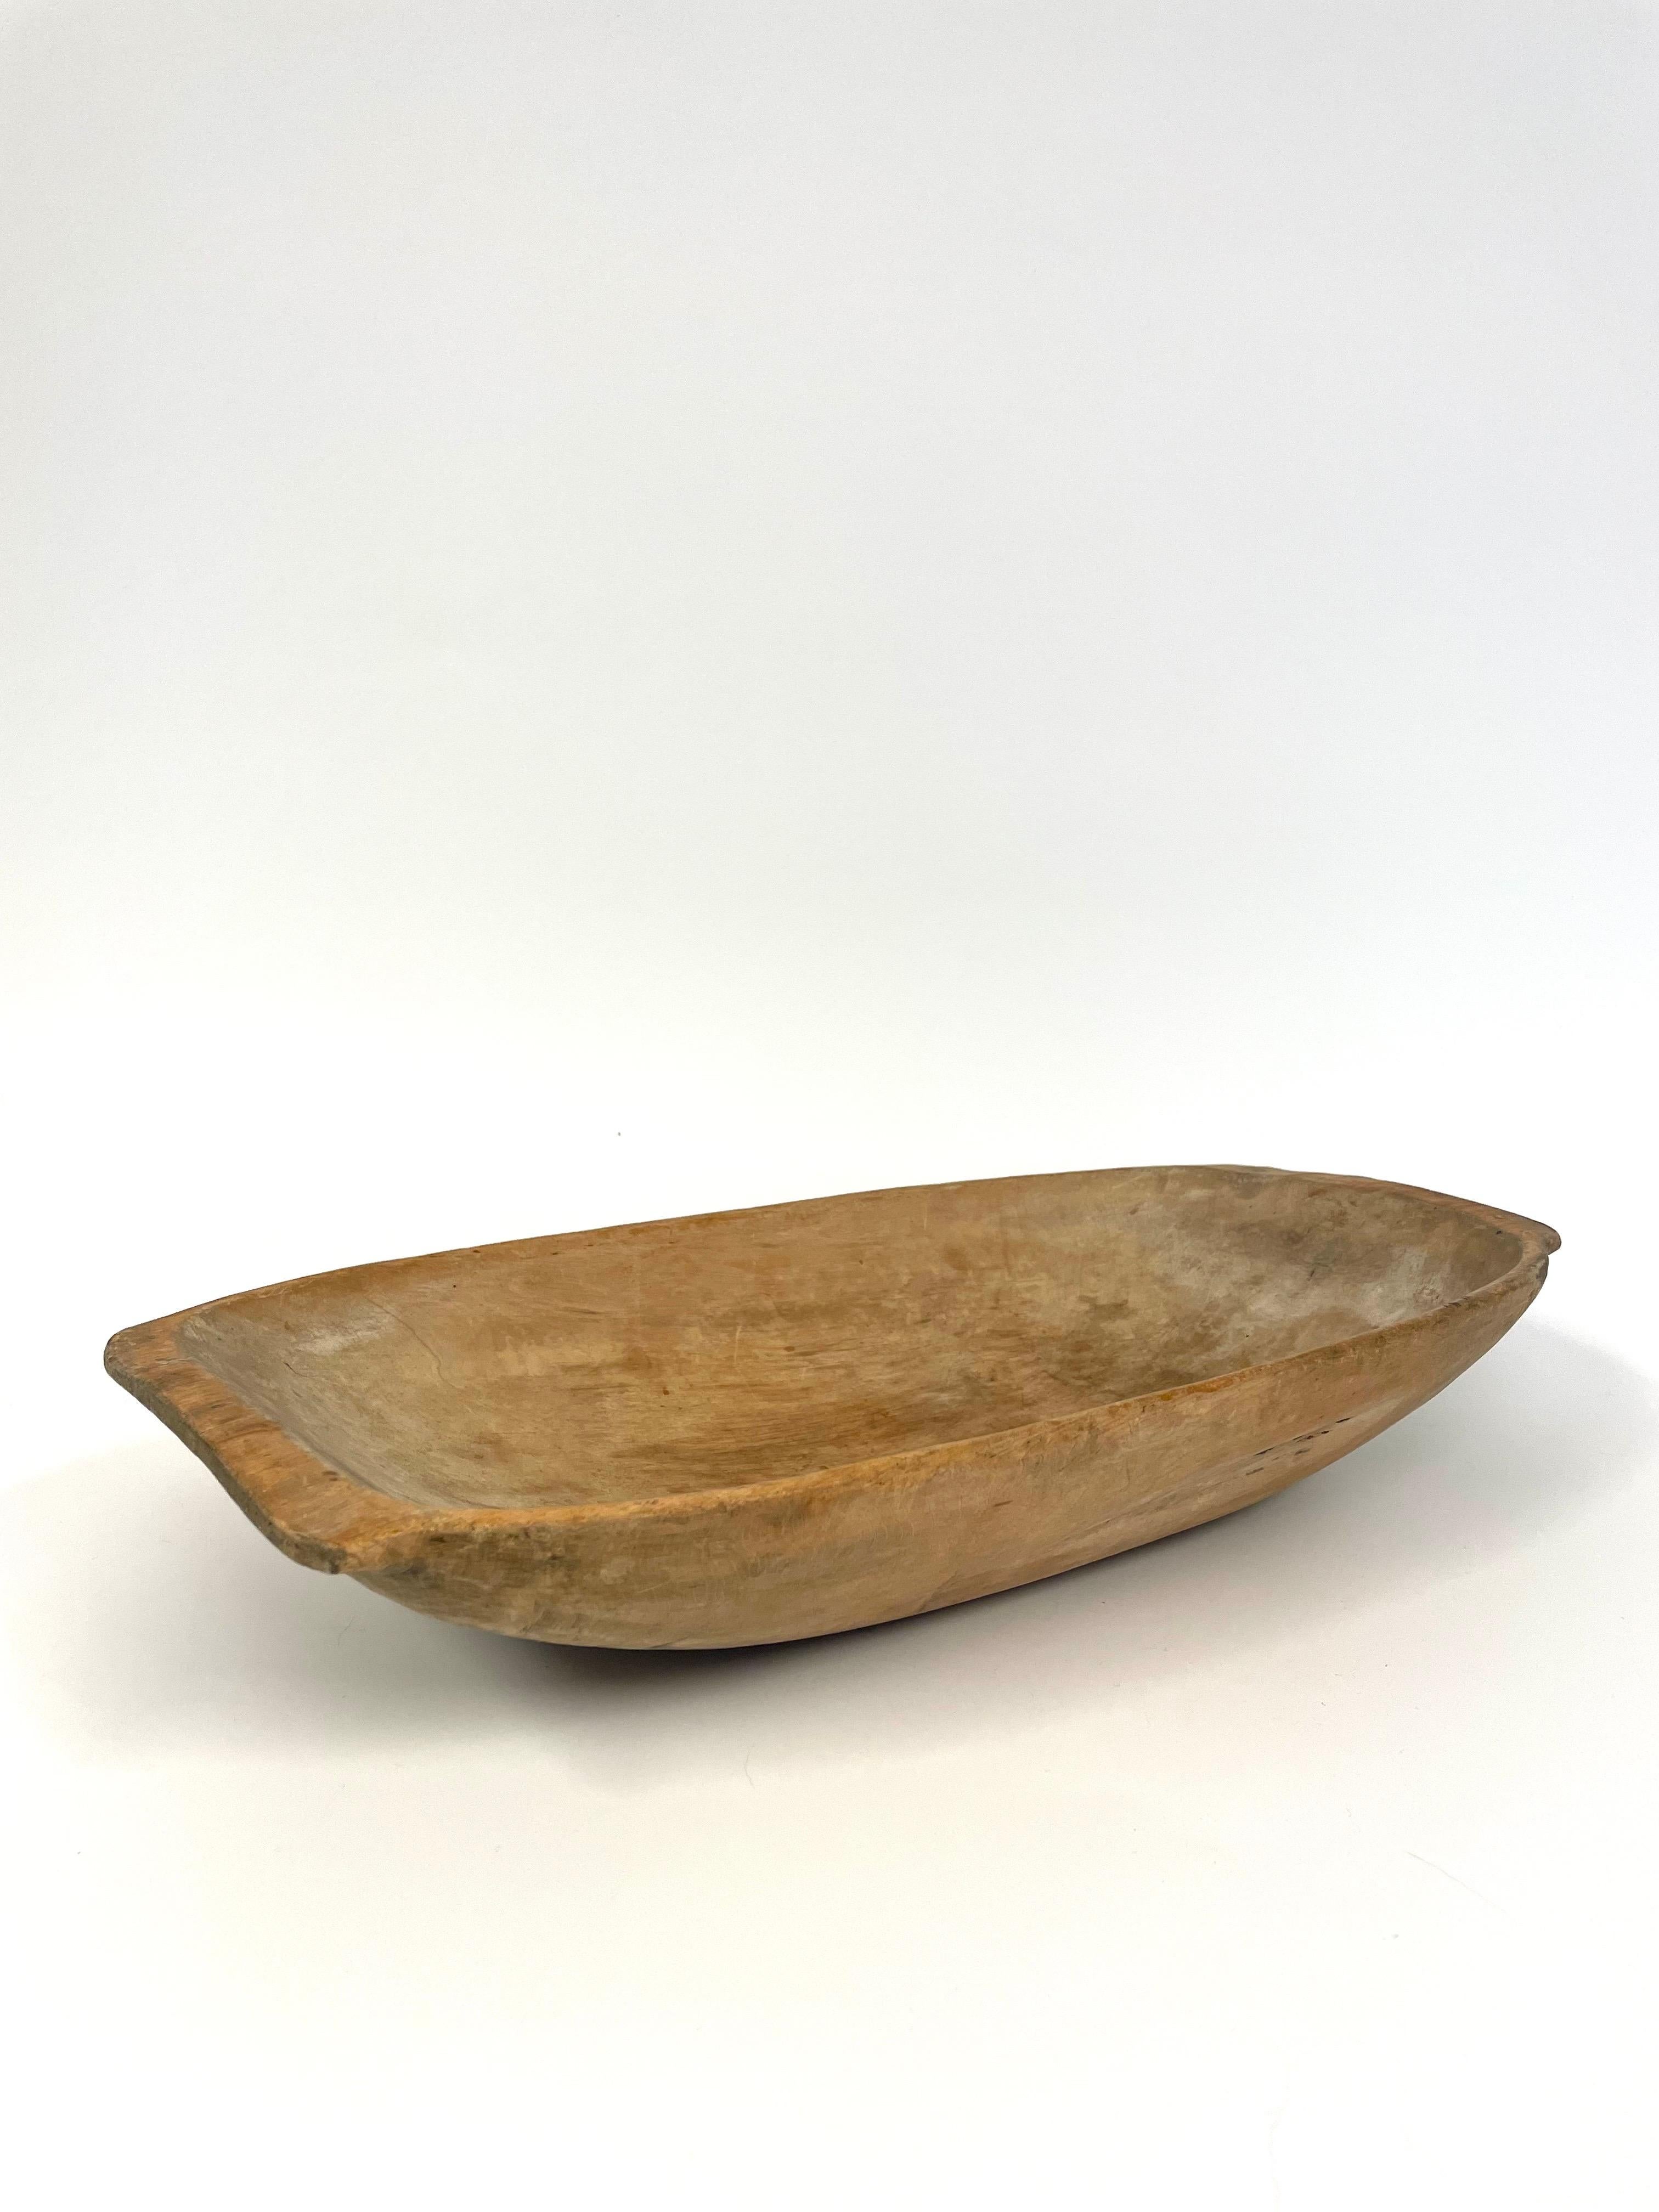 This is a very beautiful Swedish hand-carved 19th century wooden baking trough in Wabi Sabi style. 
It comes made in pine with lovely patina reflecting its age.

On both sides there are handles. To carry, of course, but above all to get a good grip